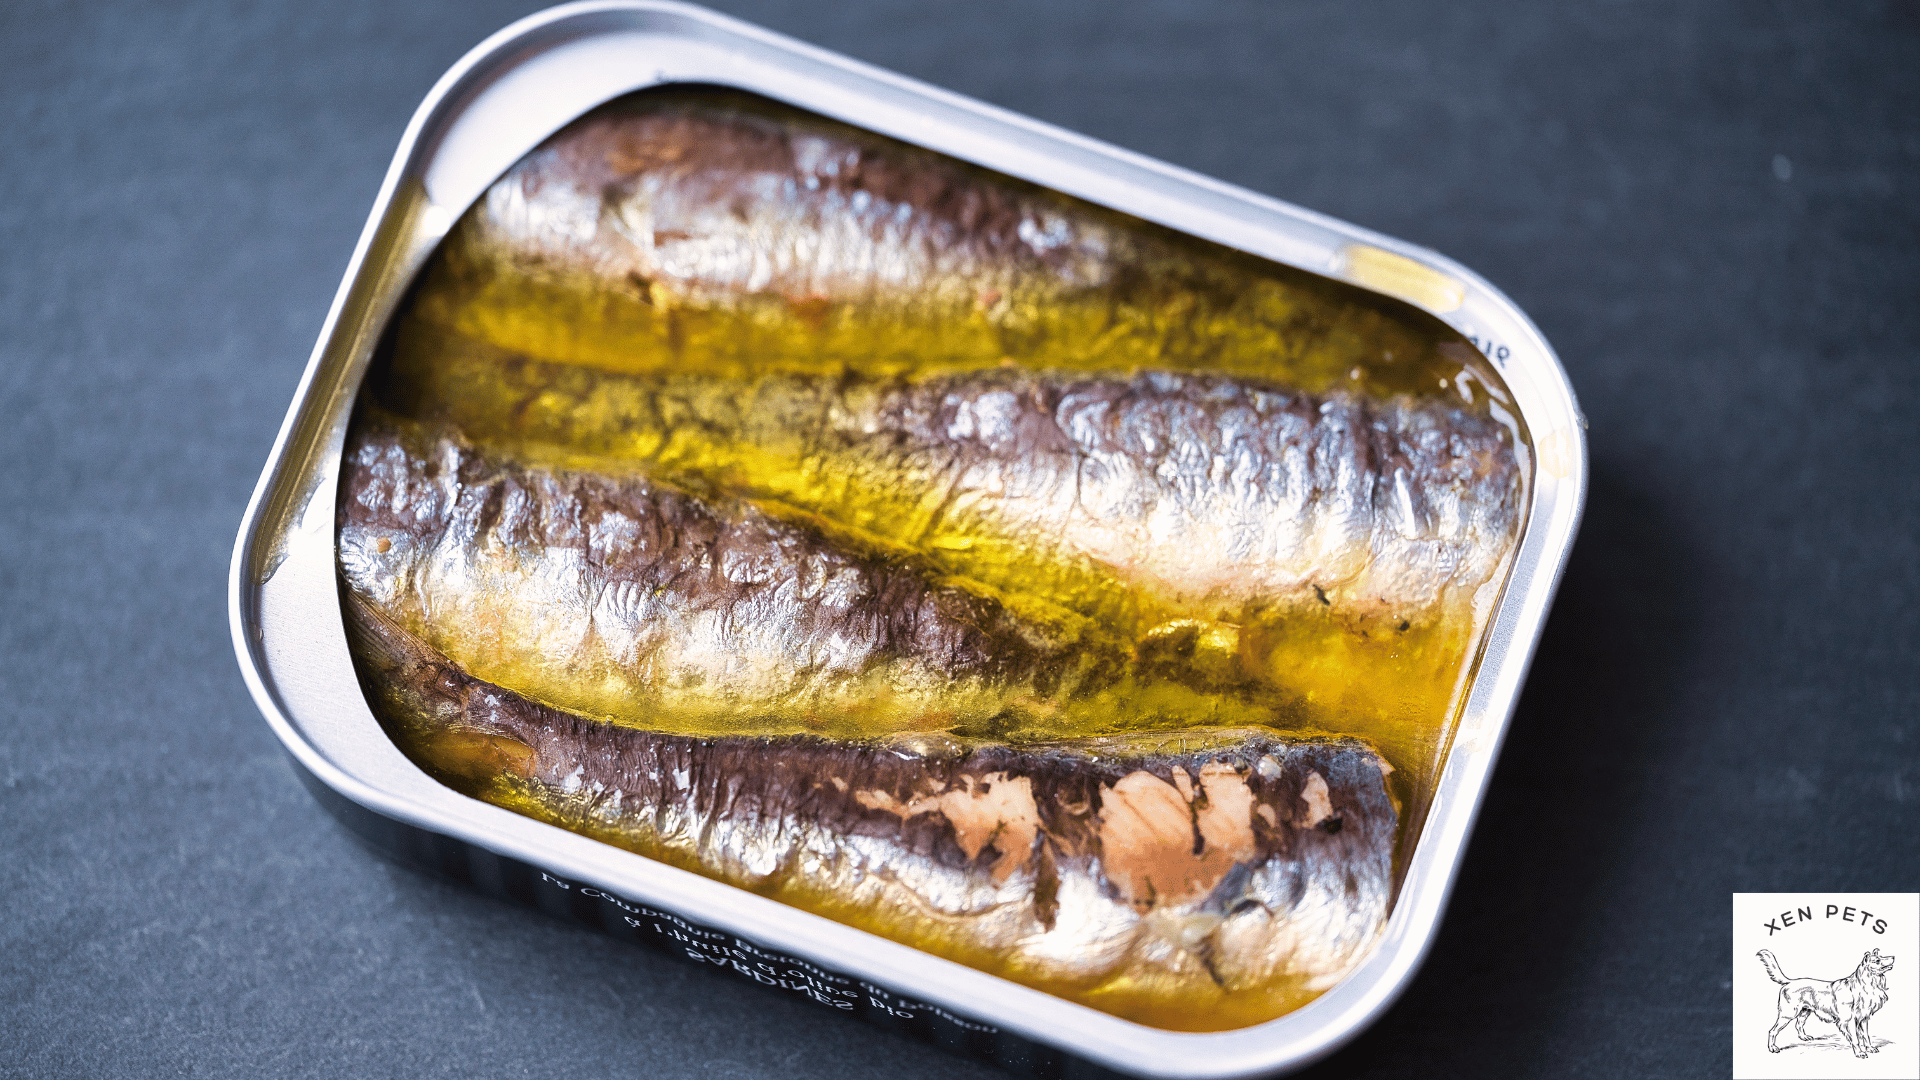 Can dogs have sardines in olive oil